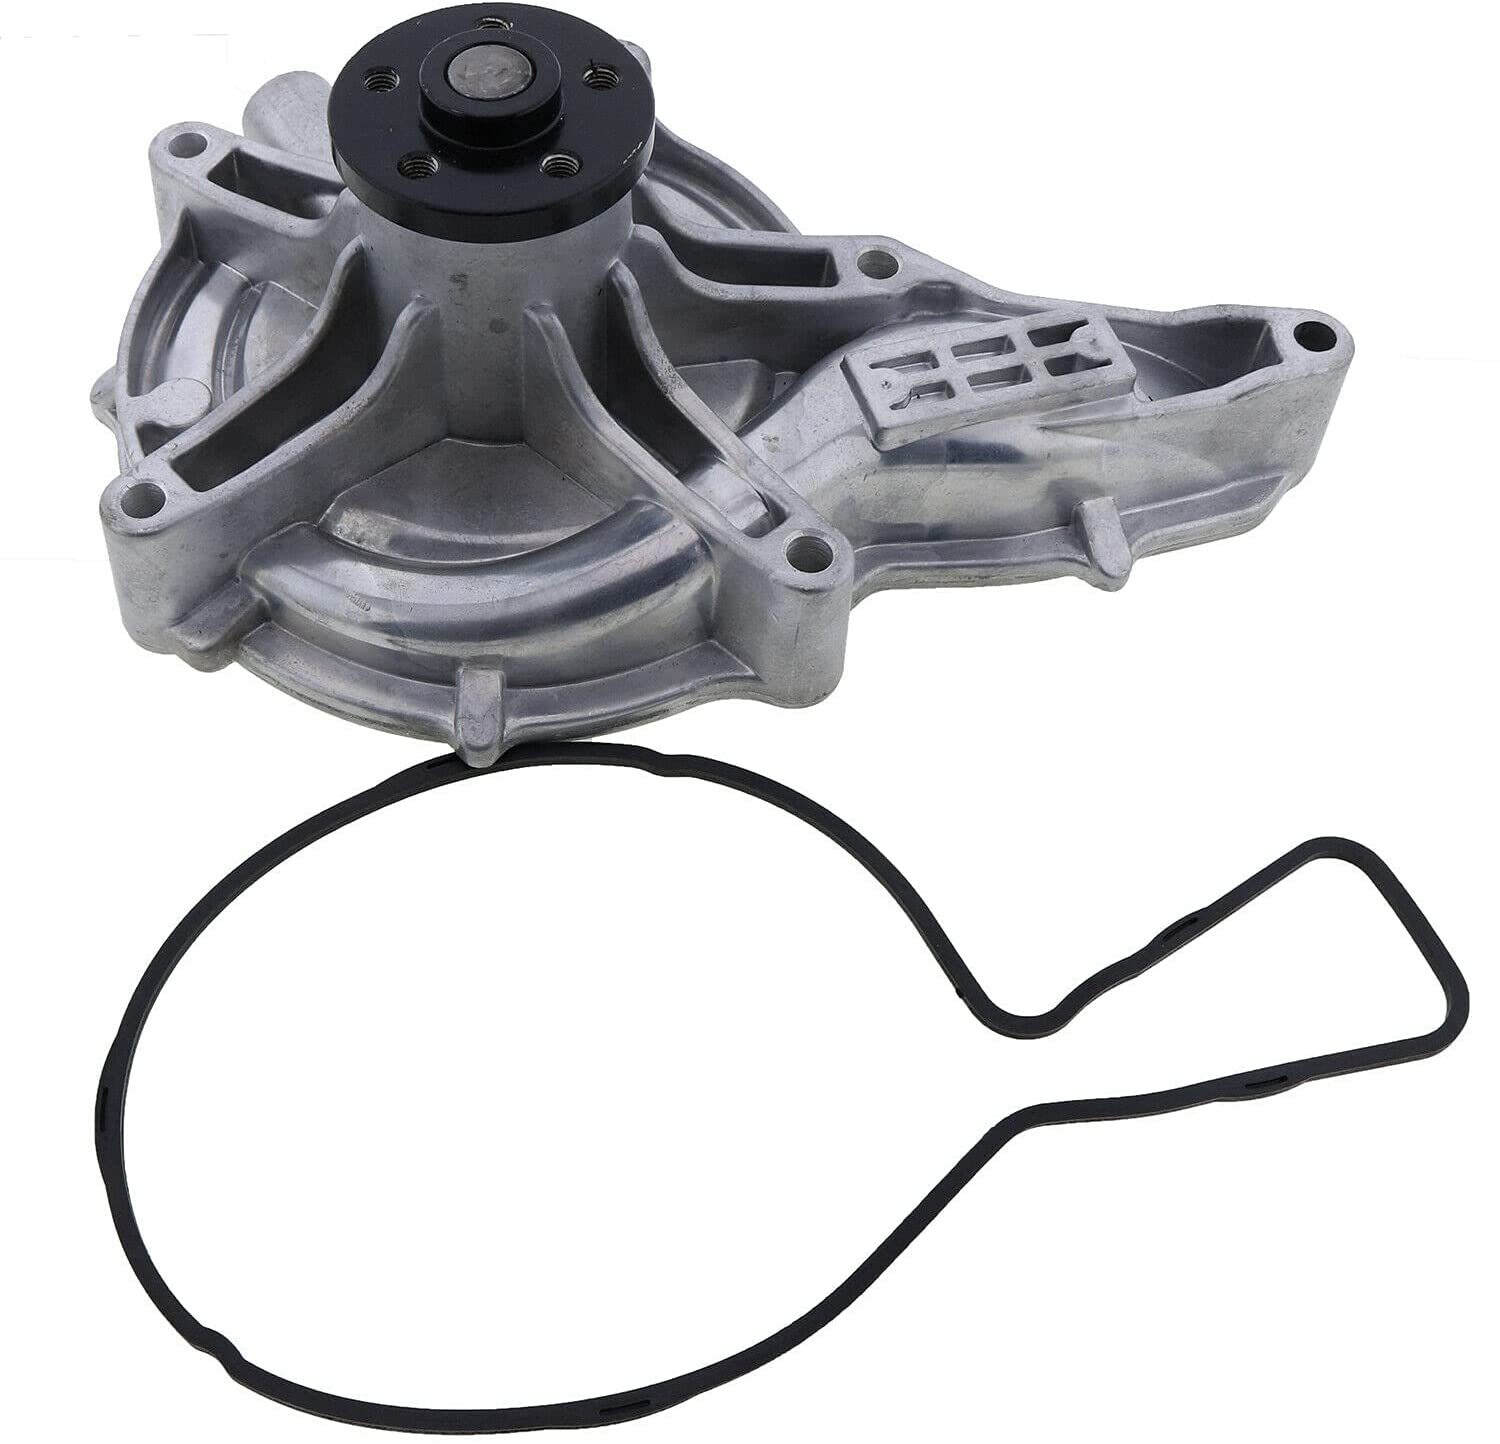 Water Pump for PAI 801131E Volvo D11 D13 D16 MACK MP7 MP8 20744939 85109694 85124623 - KUDUPARTS